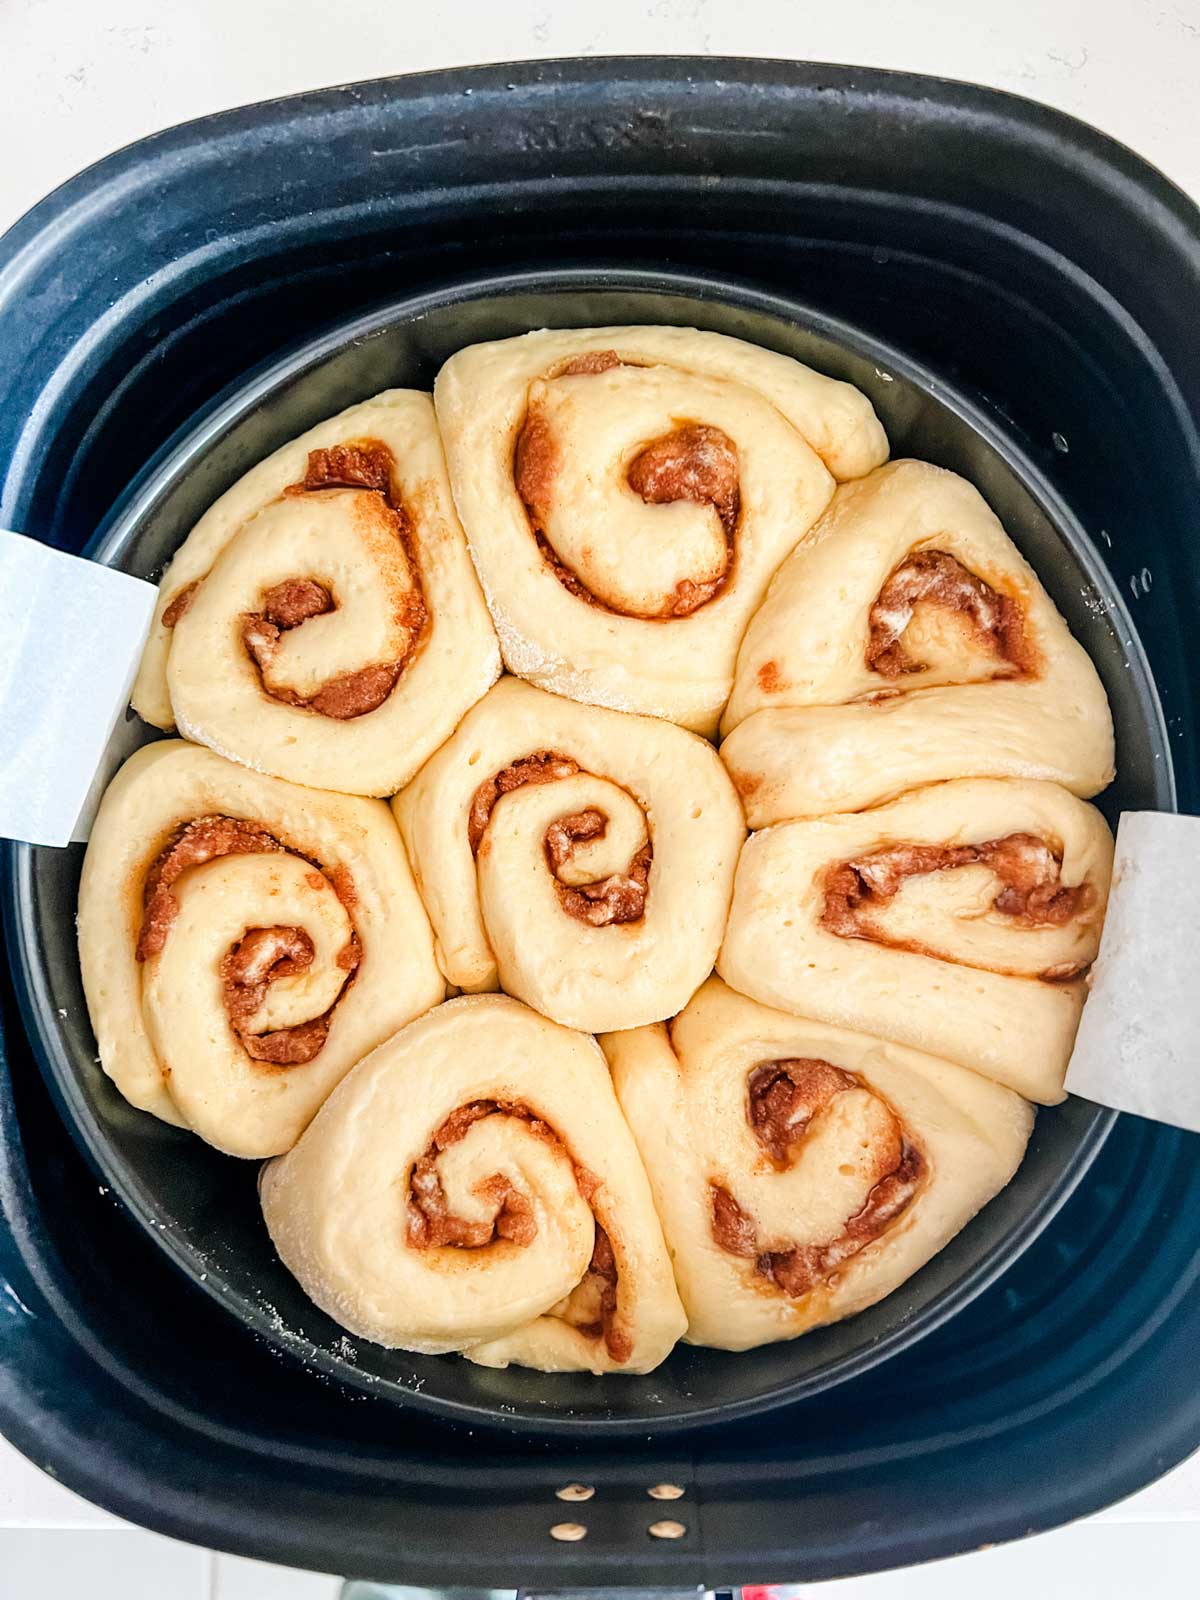 Cinnamon rolls in an air fryer basket ready to cook.